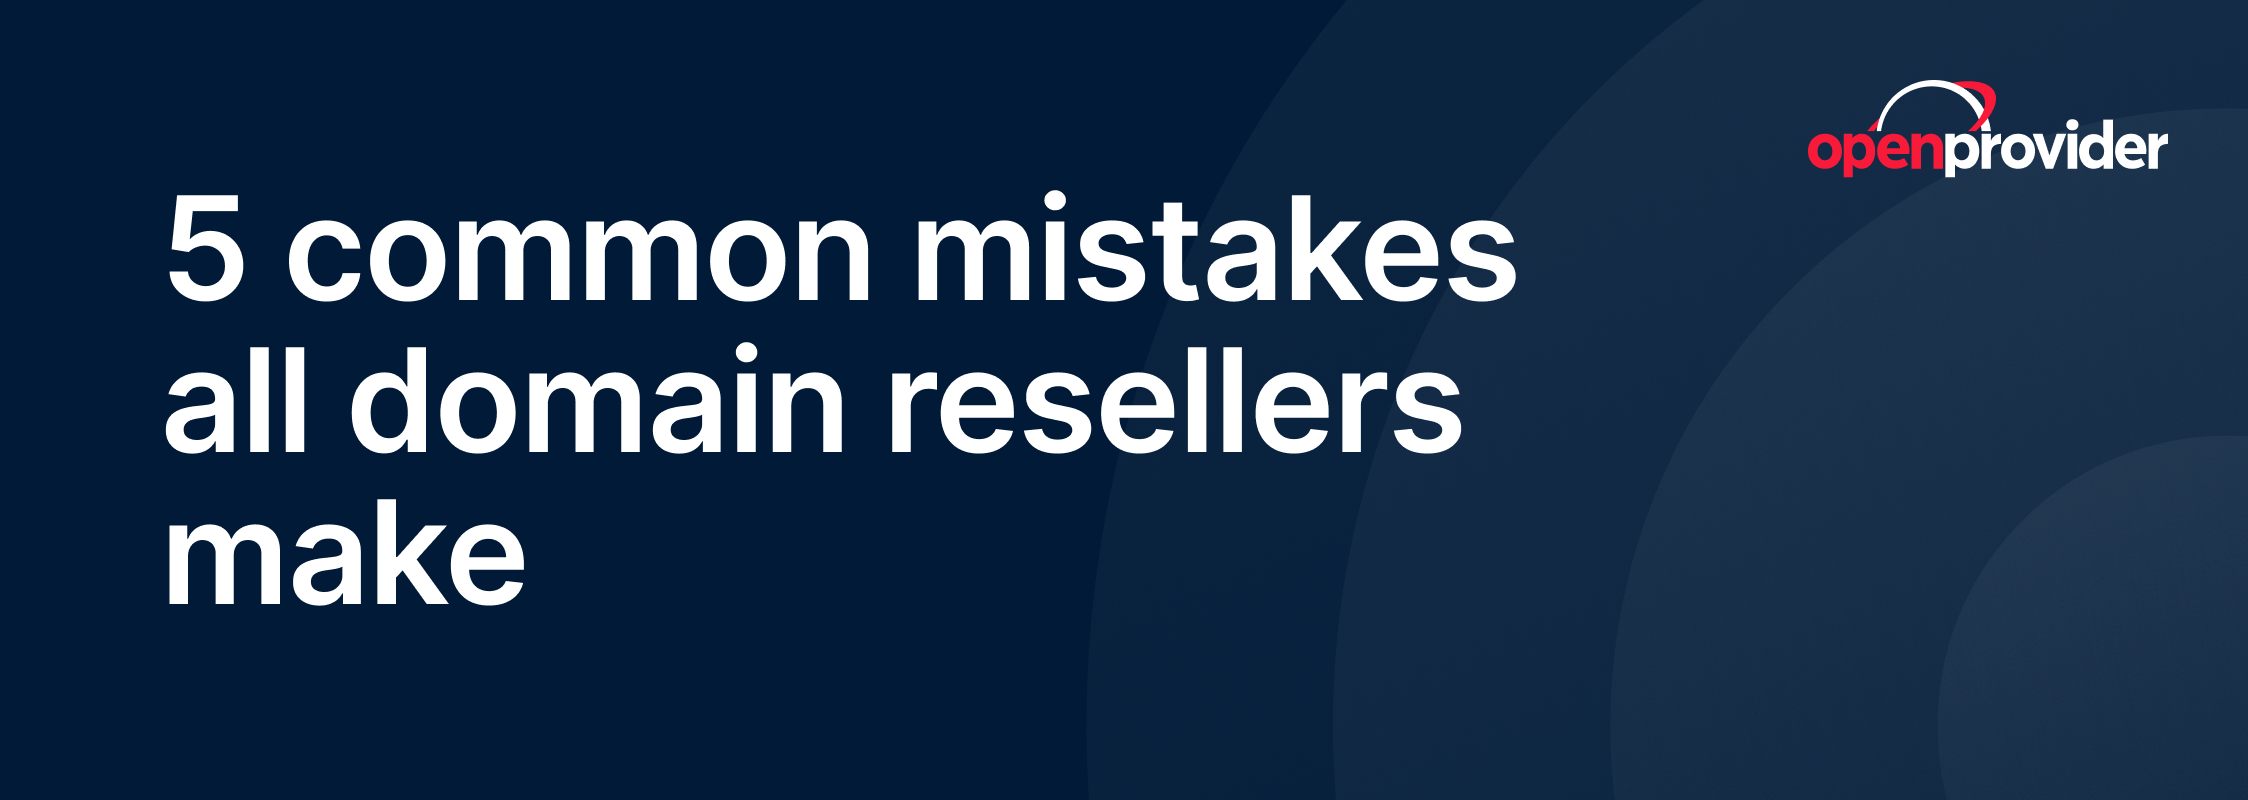 5 common mistakes all domain resellers make